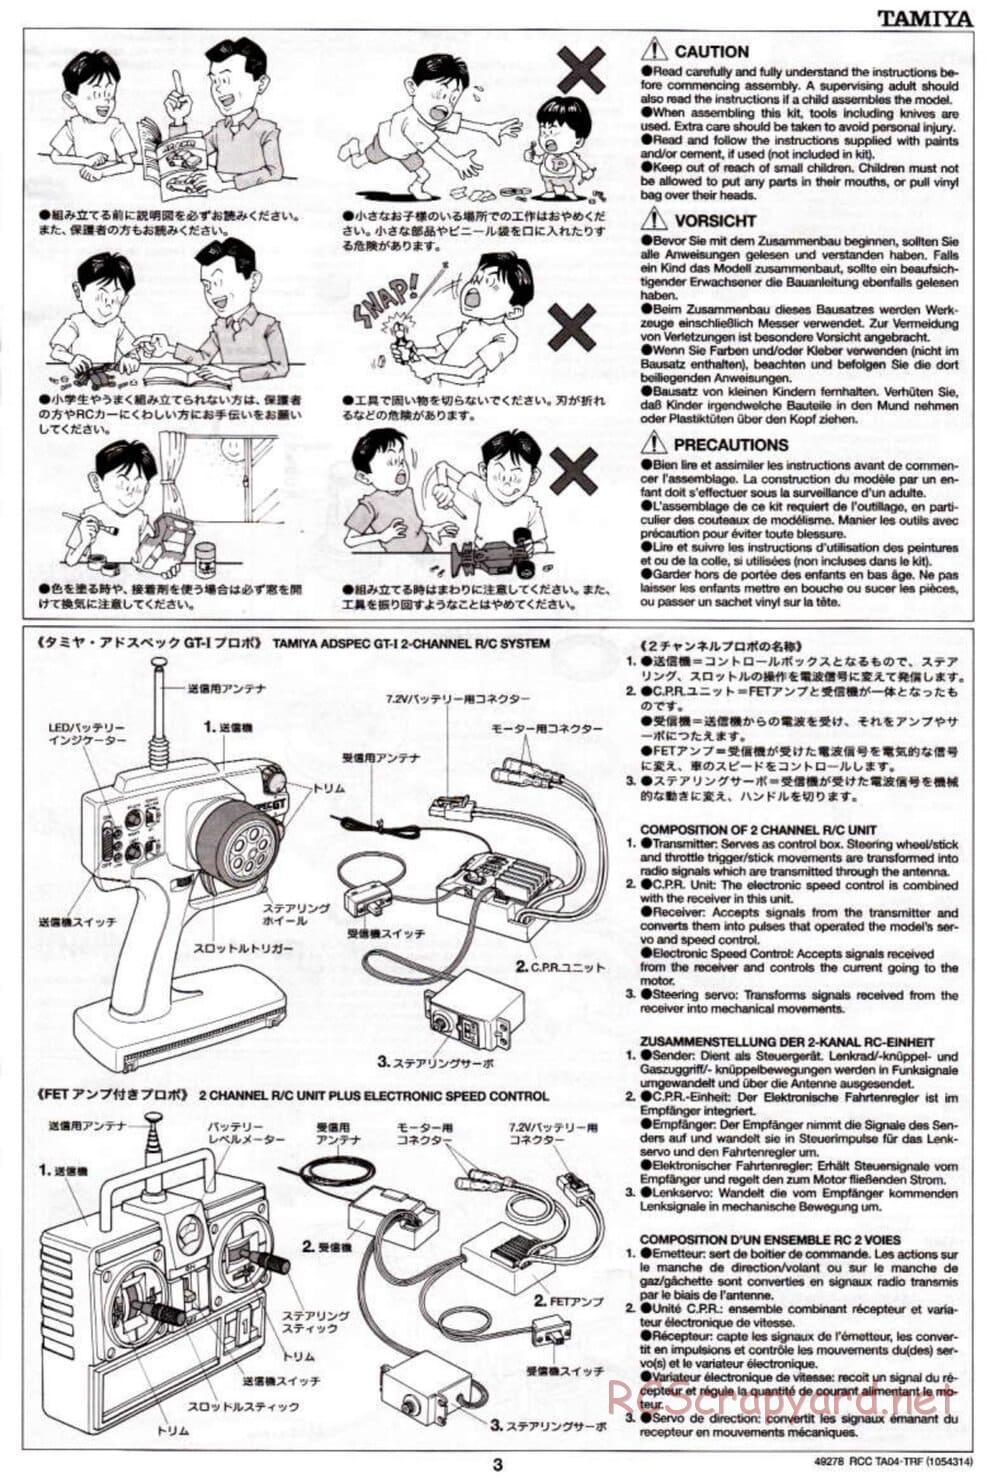 Tamiya - TA-04 TRF Special Chassis Chassis - Manual - Page 3